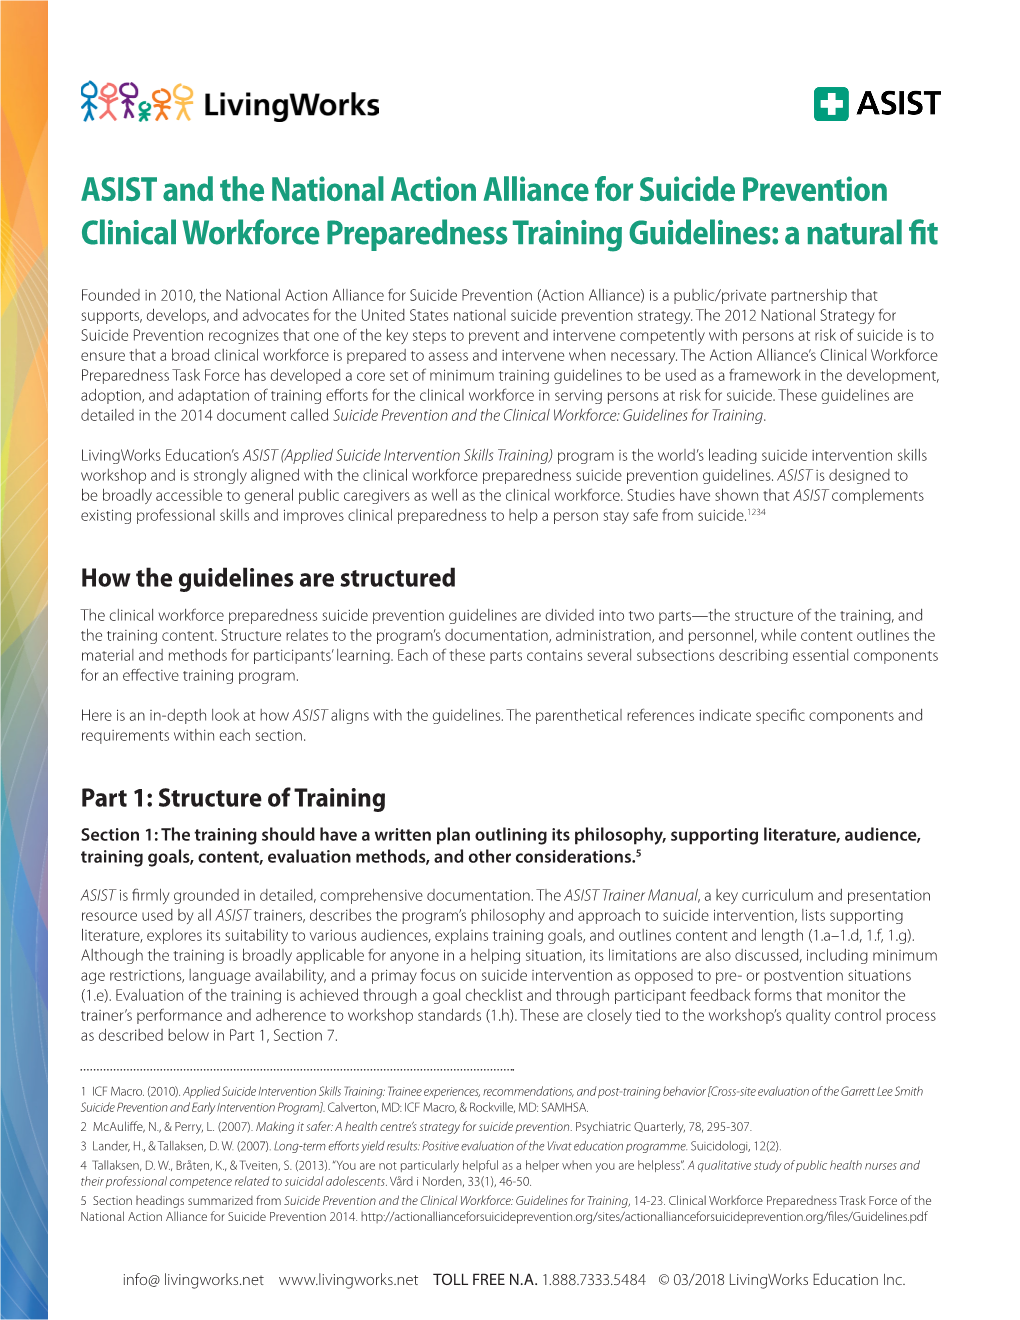 ASIST and the National Action Alliance for Suicide Prevention Clinical Workforce Preparedness Training Guidelines: a Natural Fit